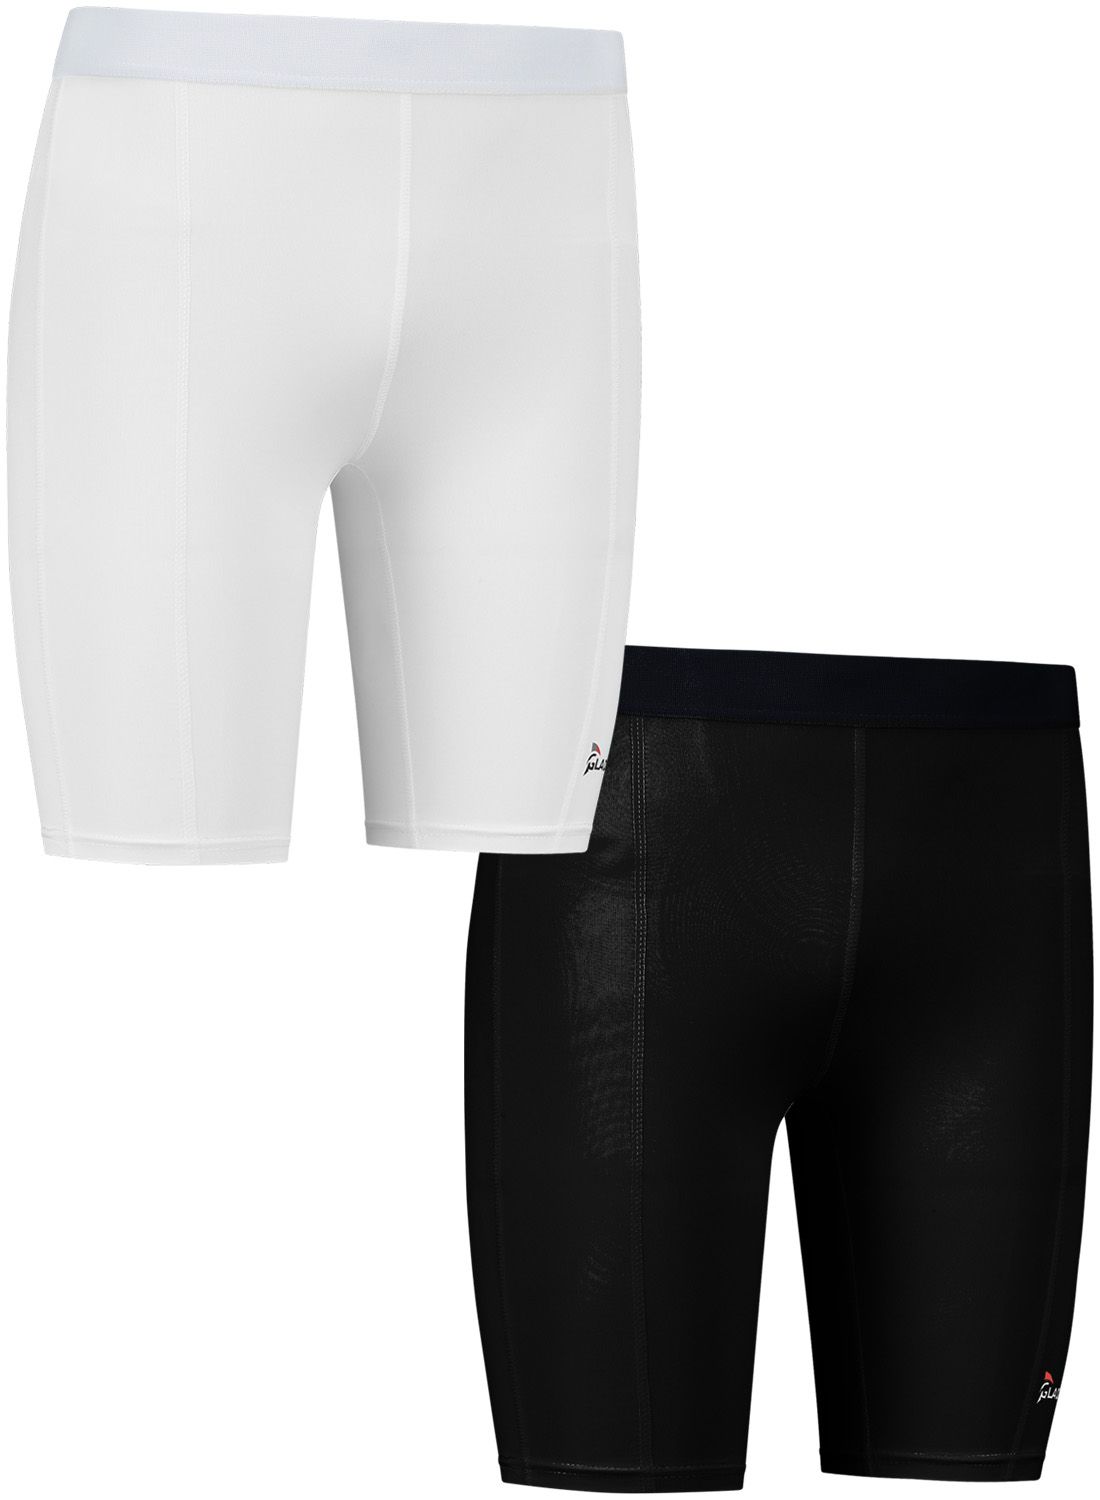 gladiator sports womens compression shorts in black and white for sale